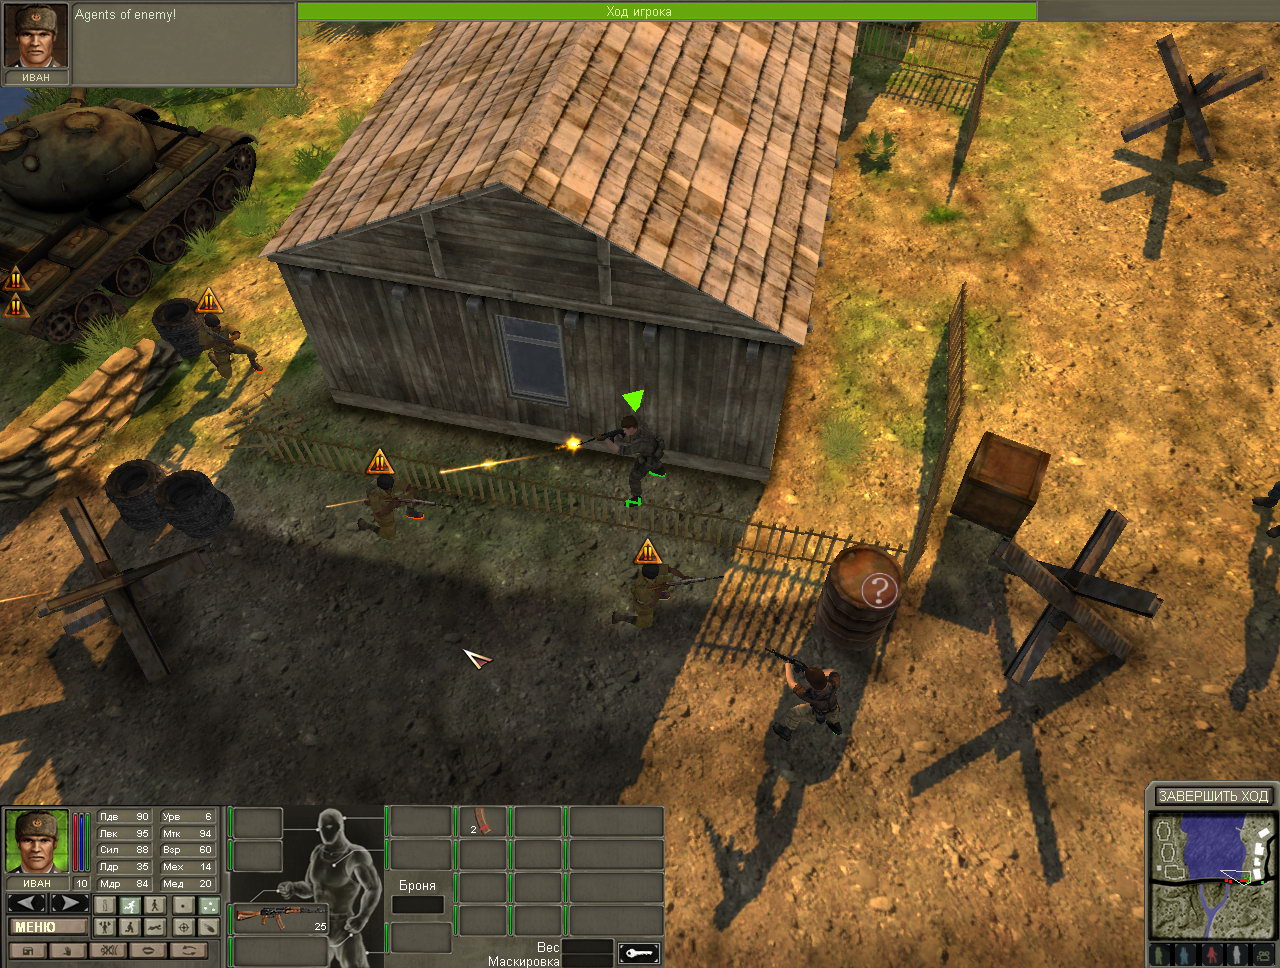 jagged alliance 3 1.13 changes